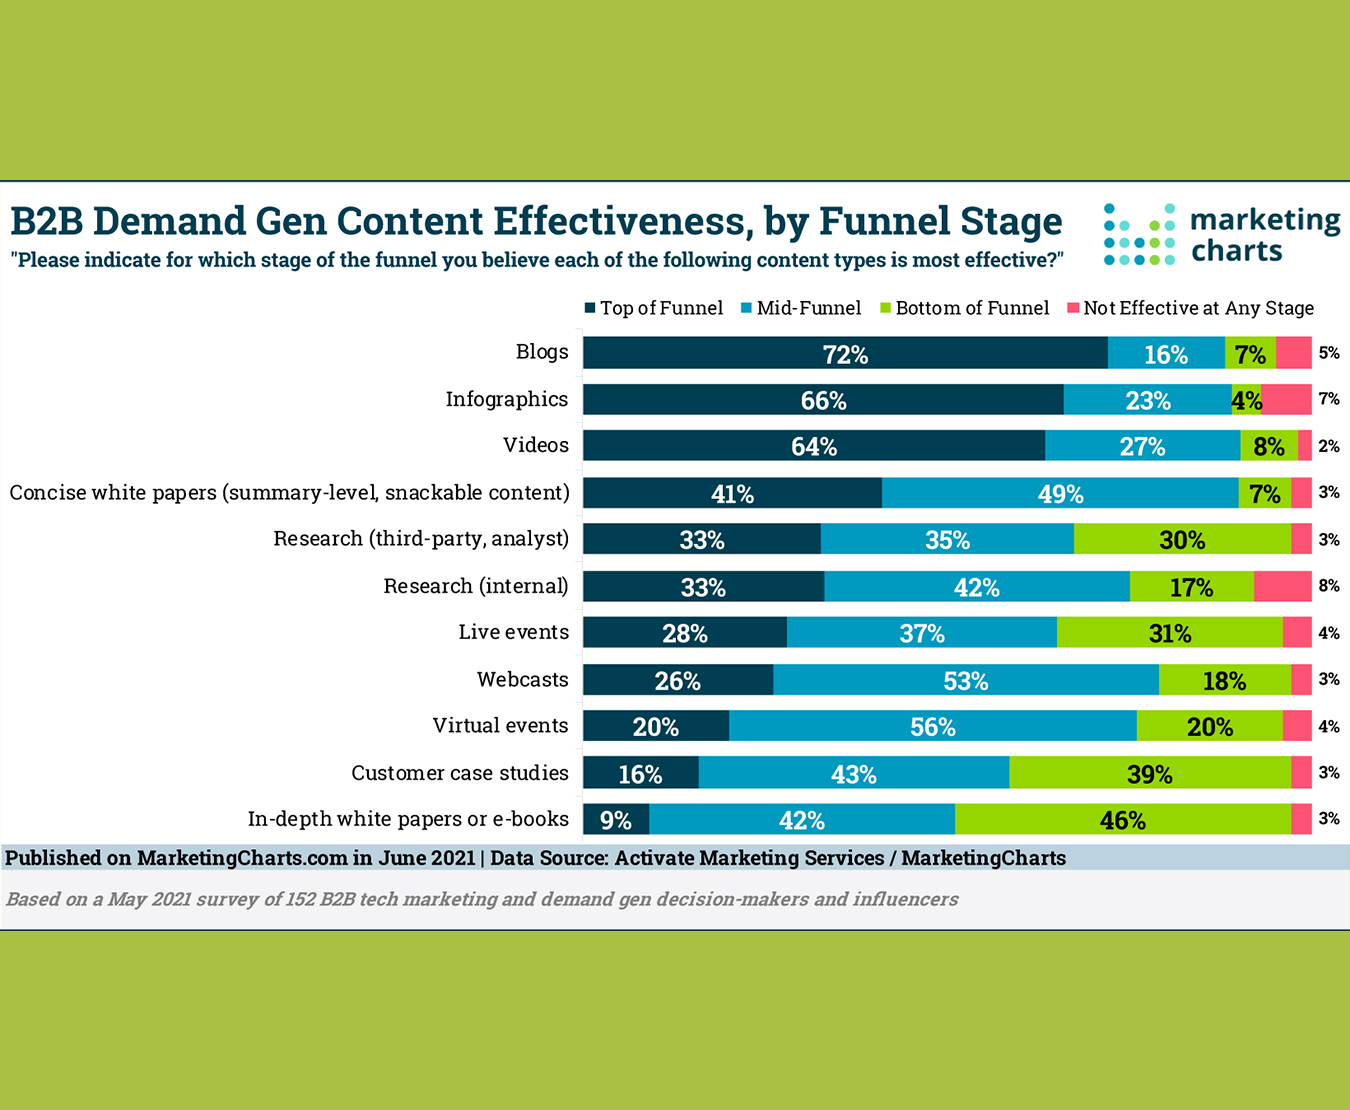 B2B website content goals should be based on stages of the buyer's journey funnel. This chart shows the top content for each stage.